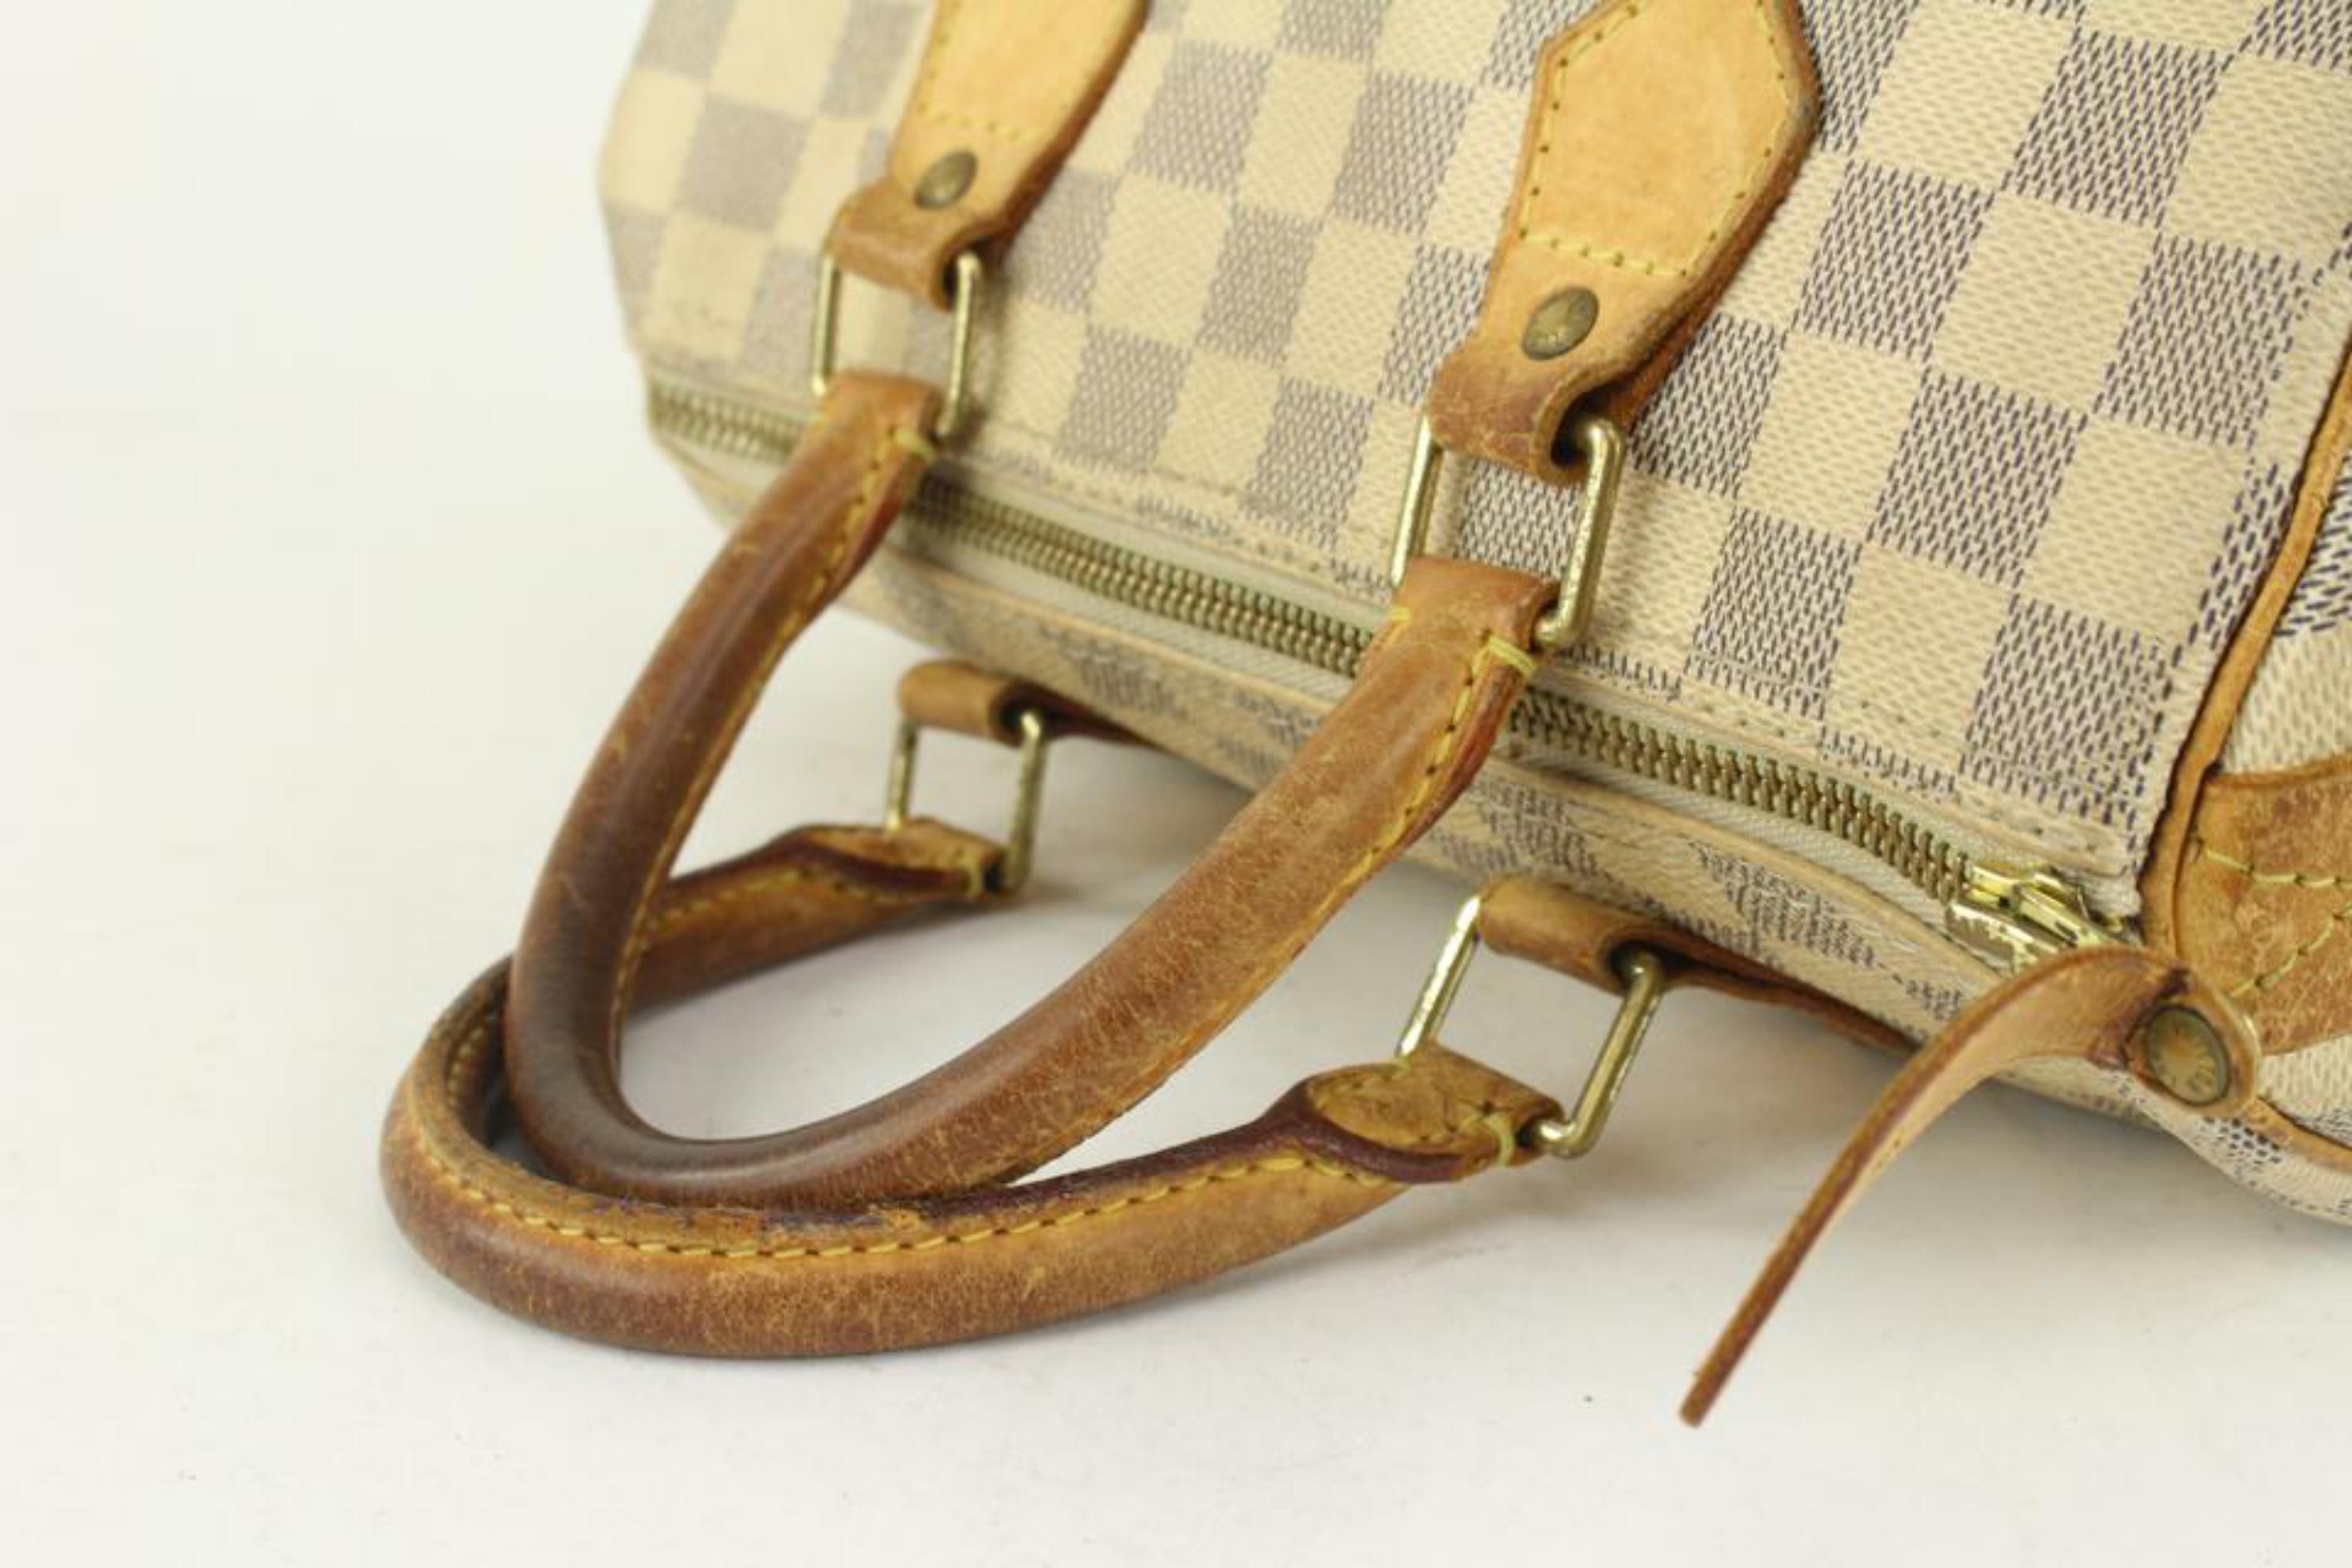 Louis Vuitton Damier Azur Speedy 25 Boston Bag 1122lv10
Date Code/Serial Number: SP2047
Made In: France
Measurements: Length:  10